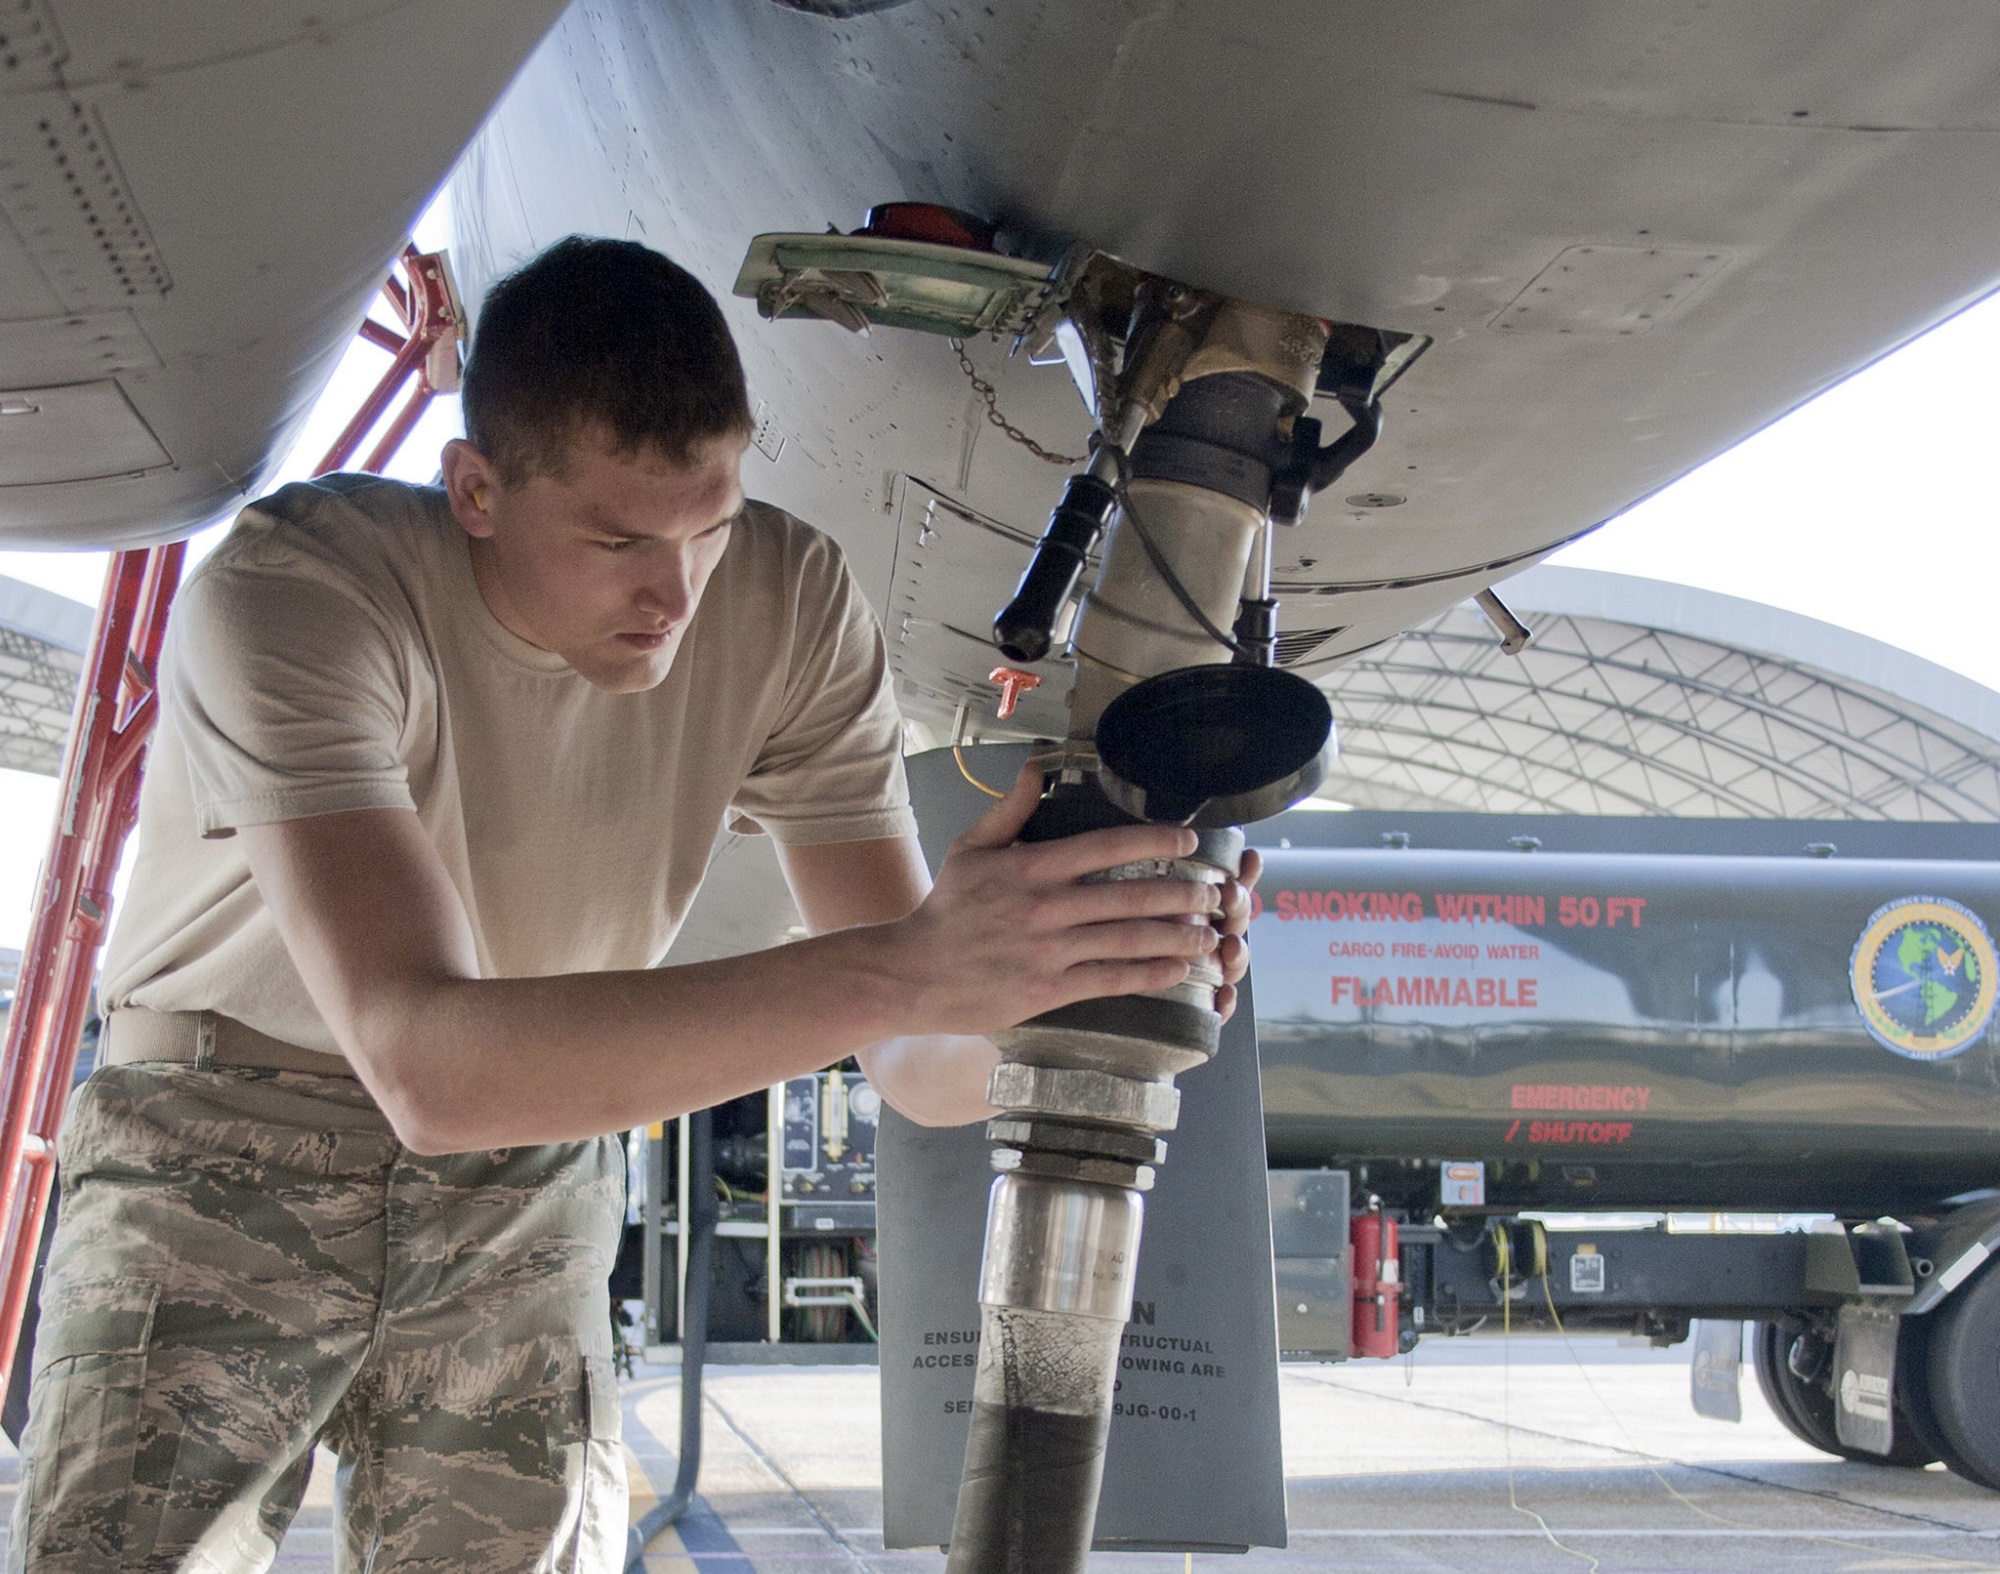 Air Force member in fatigue pants and short brown hair pumping fuel into the belly of a jet